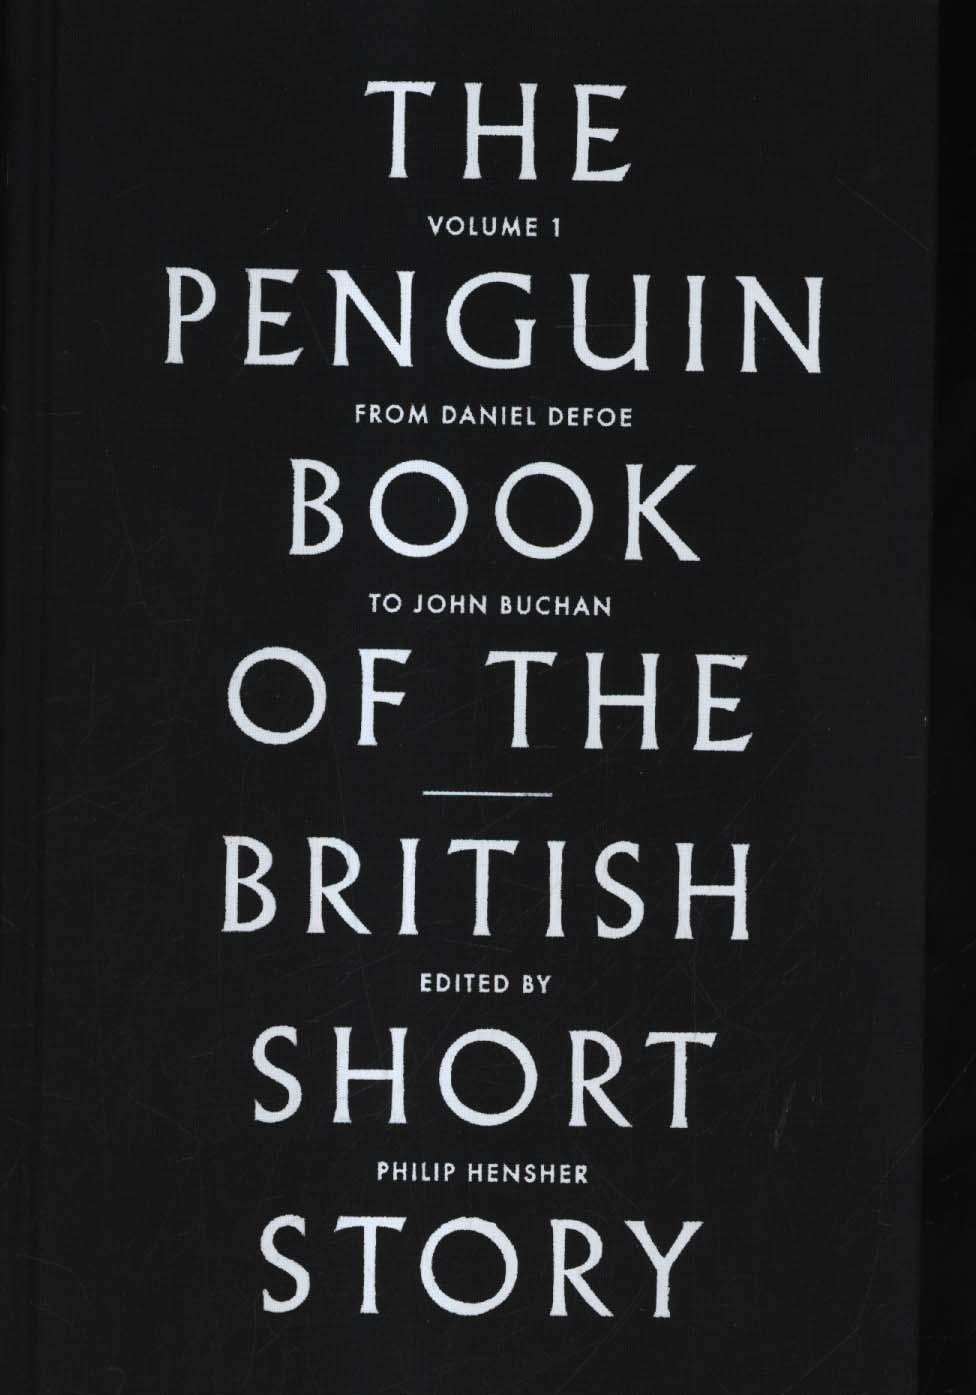 The Penguin Book of the British Short Story: I